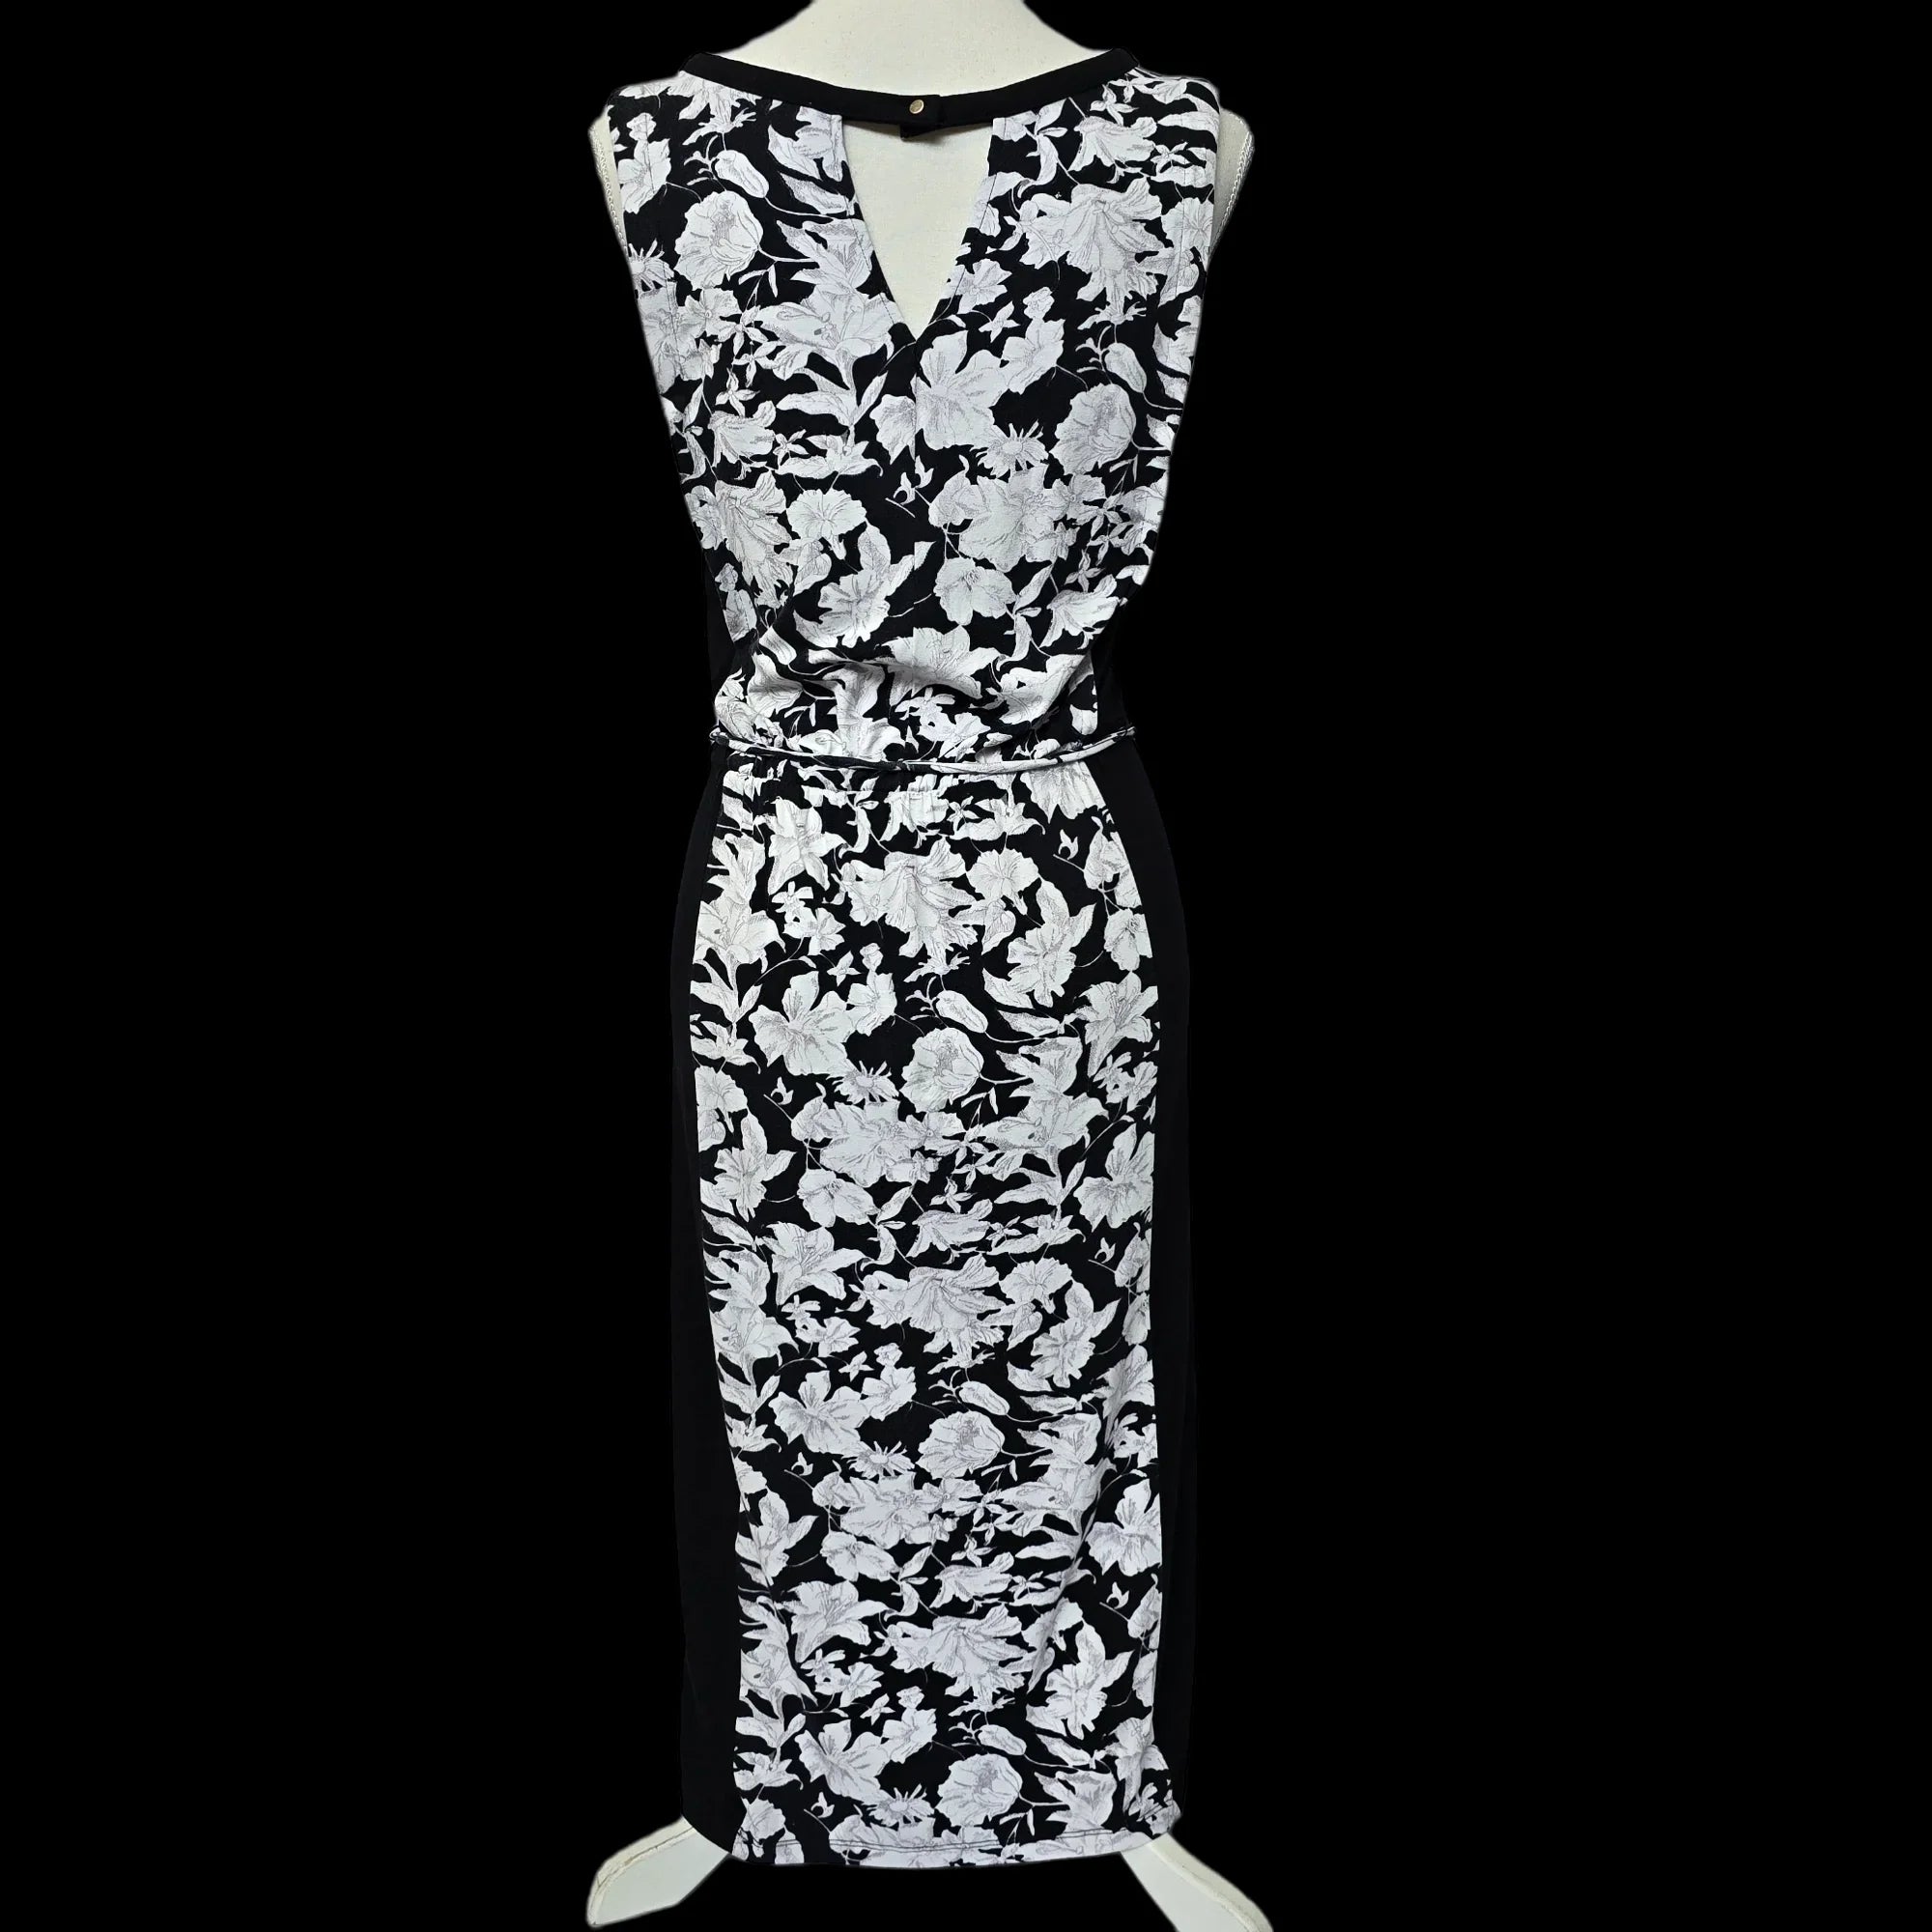 Women’s Oasis Black White Fit And Flare Dress UK Small